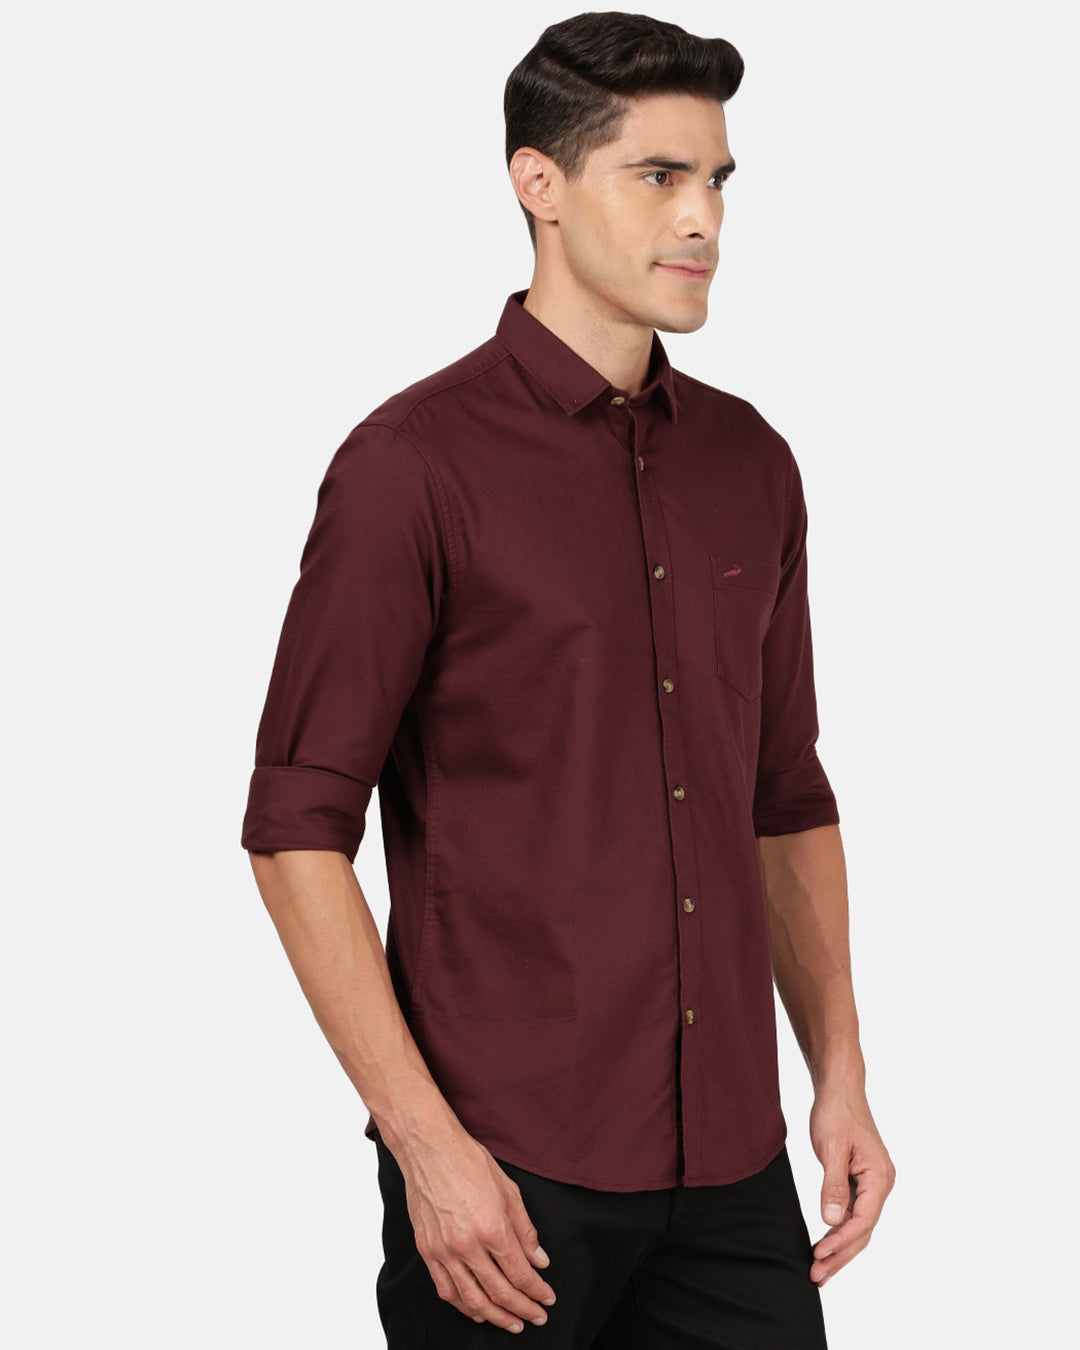 Crocodile Casual Full Sleeve Slim Fit Solid Maroon with Collar Shirt for Men